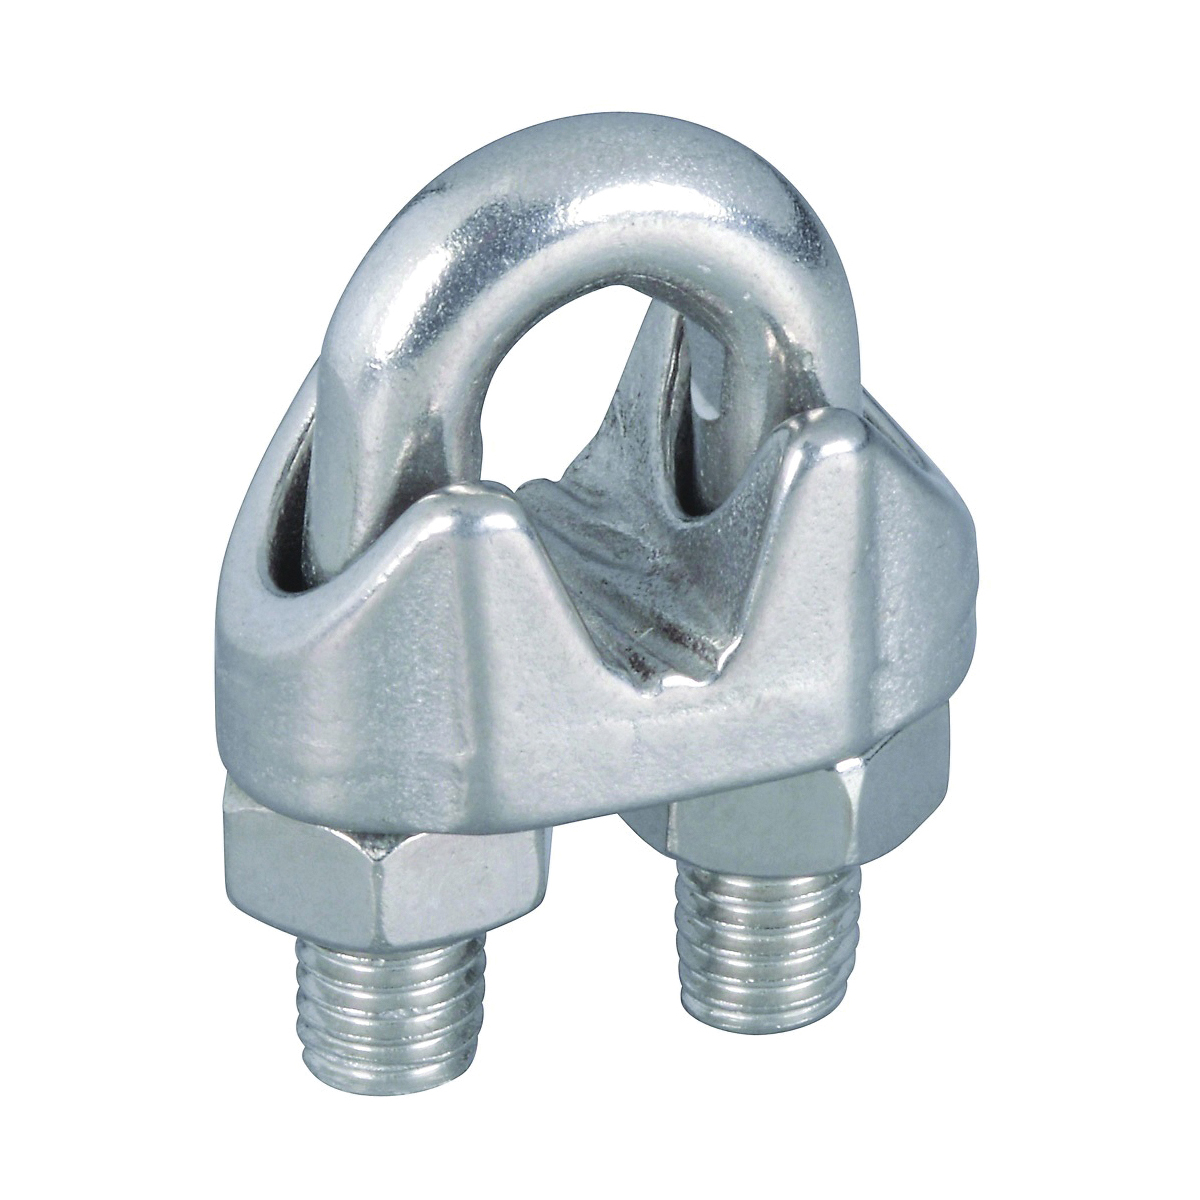 4230BC Series N830-314 Wire Cable Clamp, 1/4 in Dia Cable, 1-1/4 in L, Malleable Iron